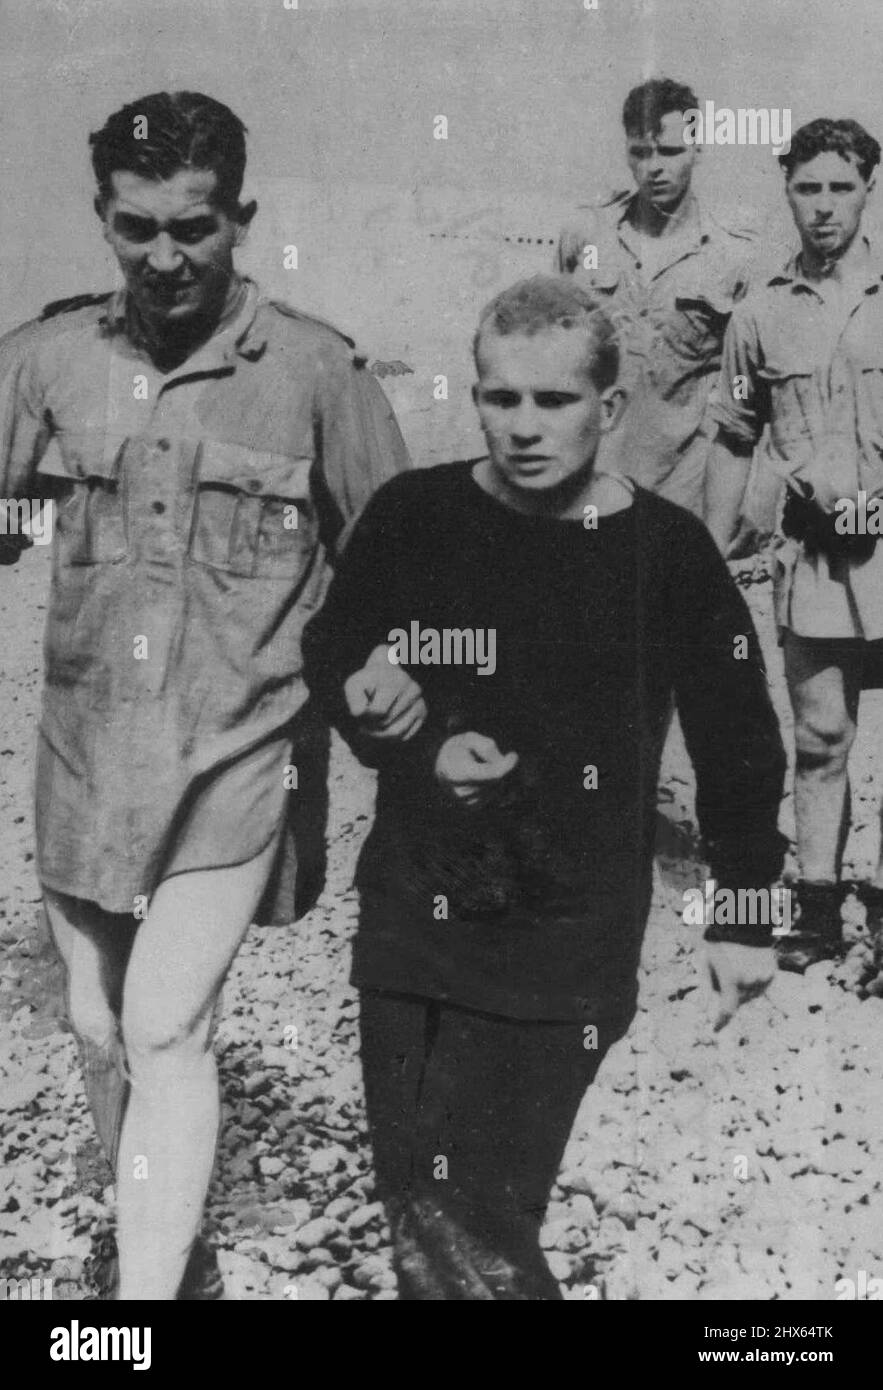 British Prisoners Captured at Dieppe Minus Trousers: New Picture Just Received. A new picture of the Dieppe 'Combined Operation', just received in London today, Sept. 9, showing British prisoners, captured during the raid, being Led, trouserless, up the Beach in charge of a German wearing a thick Jersey. September 9, 1942. (Photo by Associated Press Photo). Stock Photo